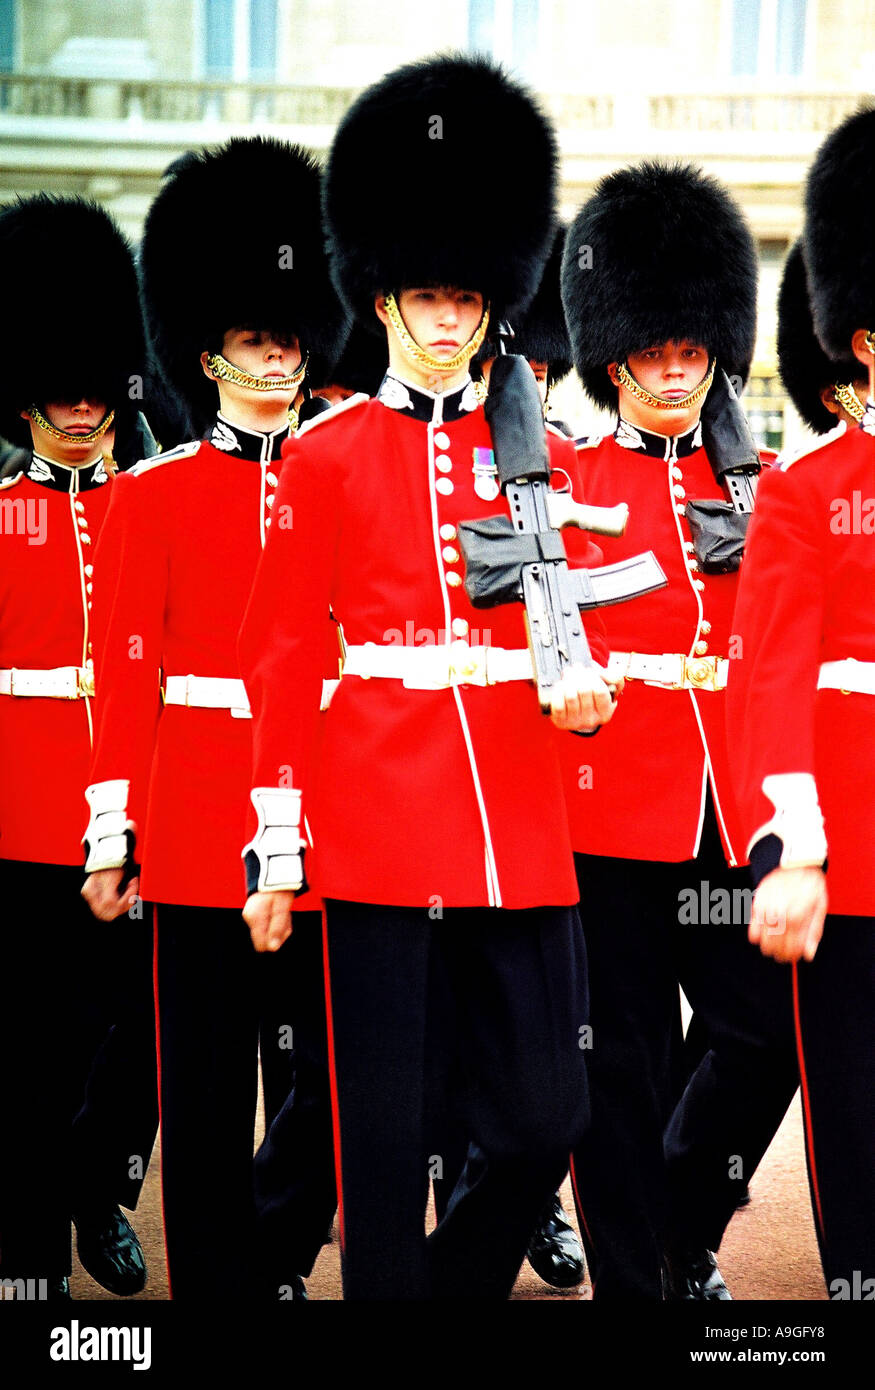 Royal Guards, marching in front of the Buckingham Palace, Changing of the Guards Militaer, Parade, Waffen, Gewehr, Reihenfolge, Stock Photo